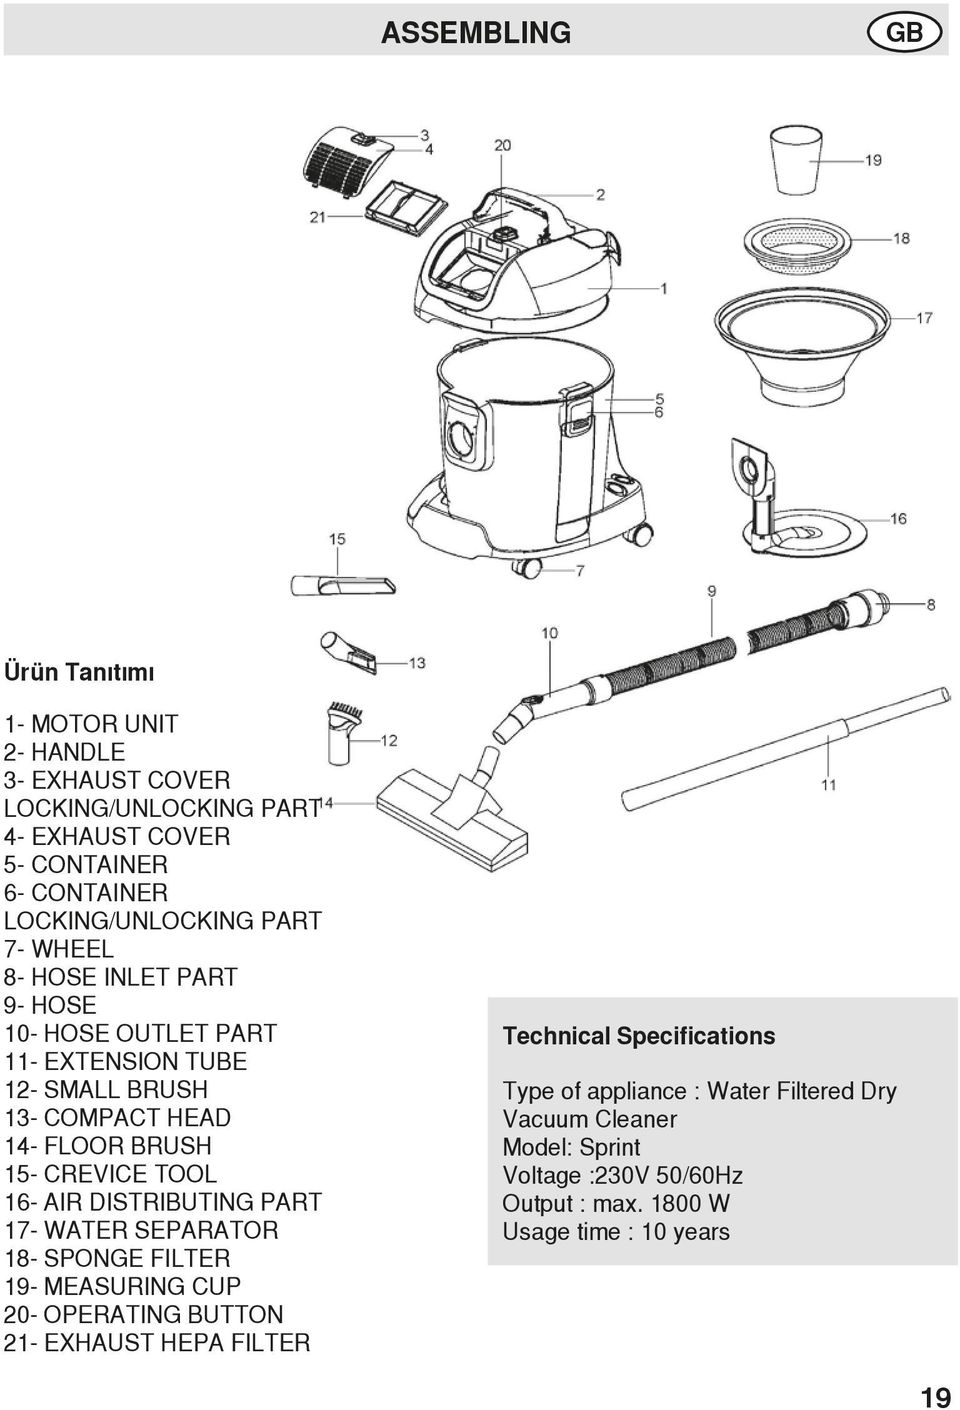 BRUSH 15- CREVICE TOOL 16- AIR DISTRIBUTING PART 17- WATER SEPARATOR 18- SPONGE FILTER 19- MEASURING CUP 20- OPERATING BUTTON 21- EXHAUST HEPA